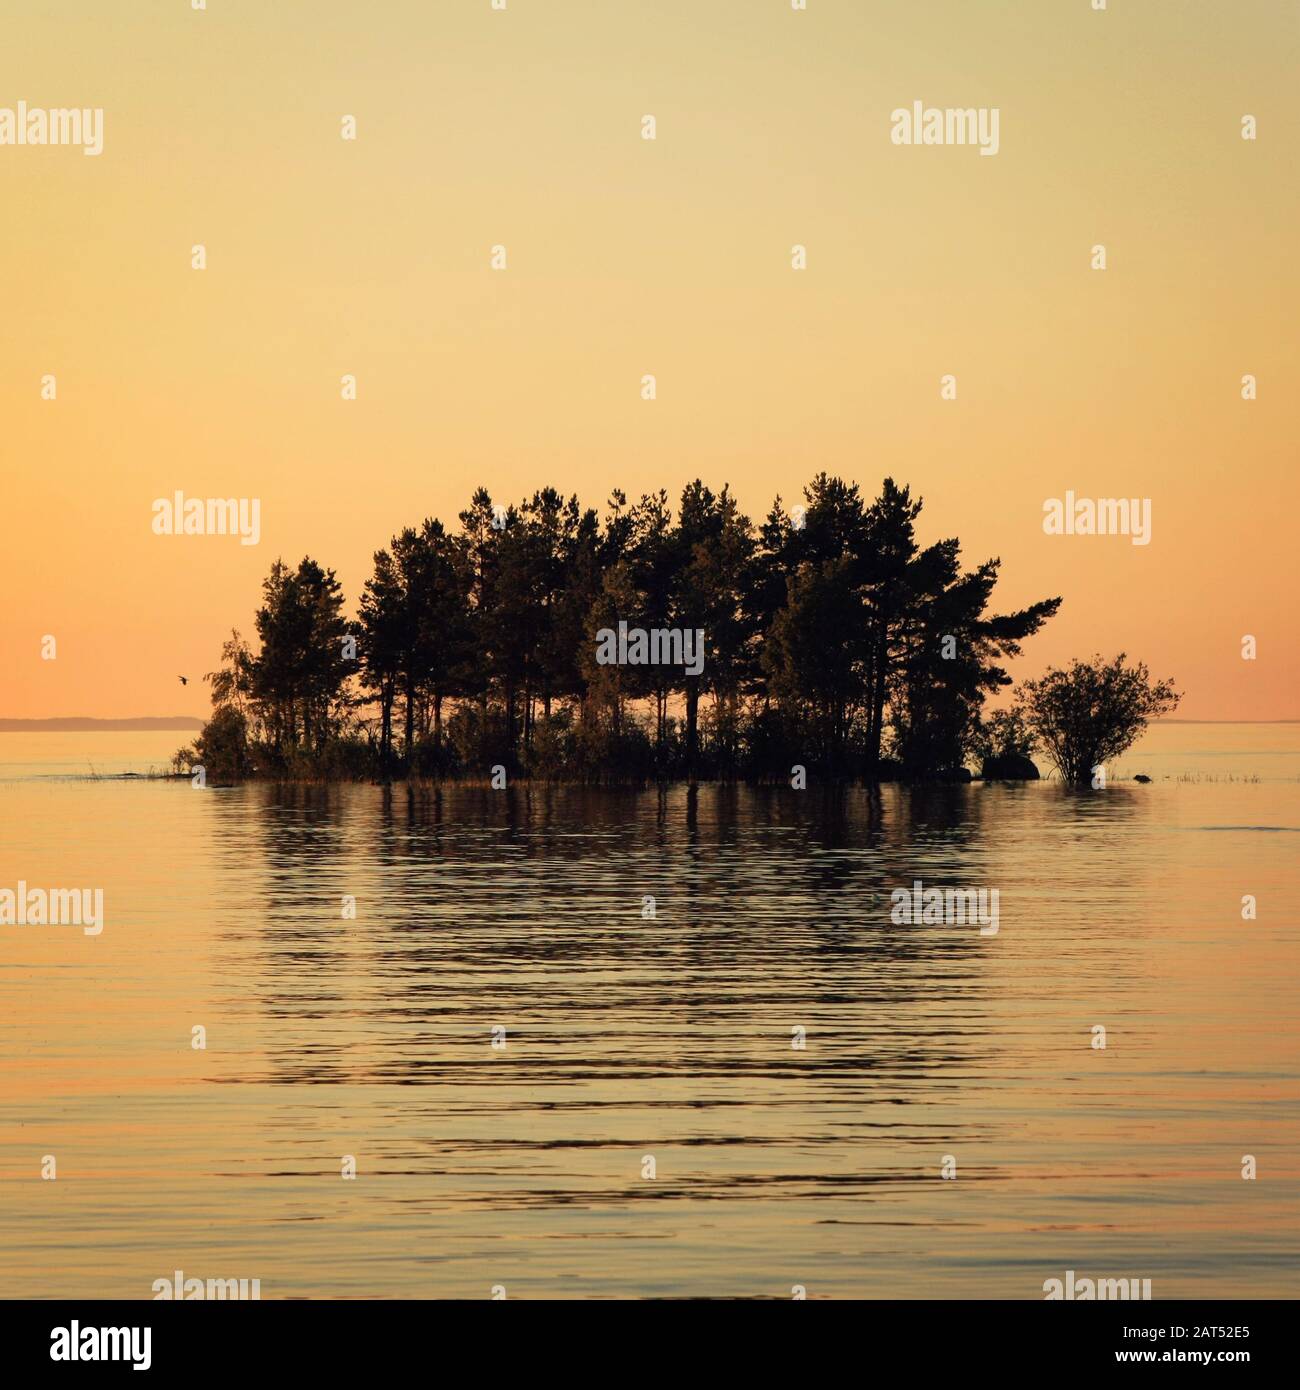 Small island in the Ladoga lake. Sunset on Valaam. Colorful summer evening. Wild nature of Russian North. Lake and pine trees. Republic of Karelia, Ru Stock Photo